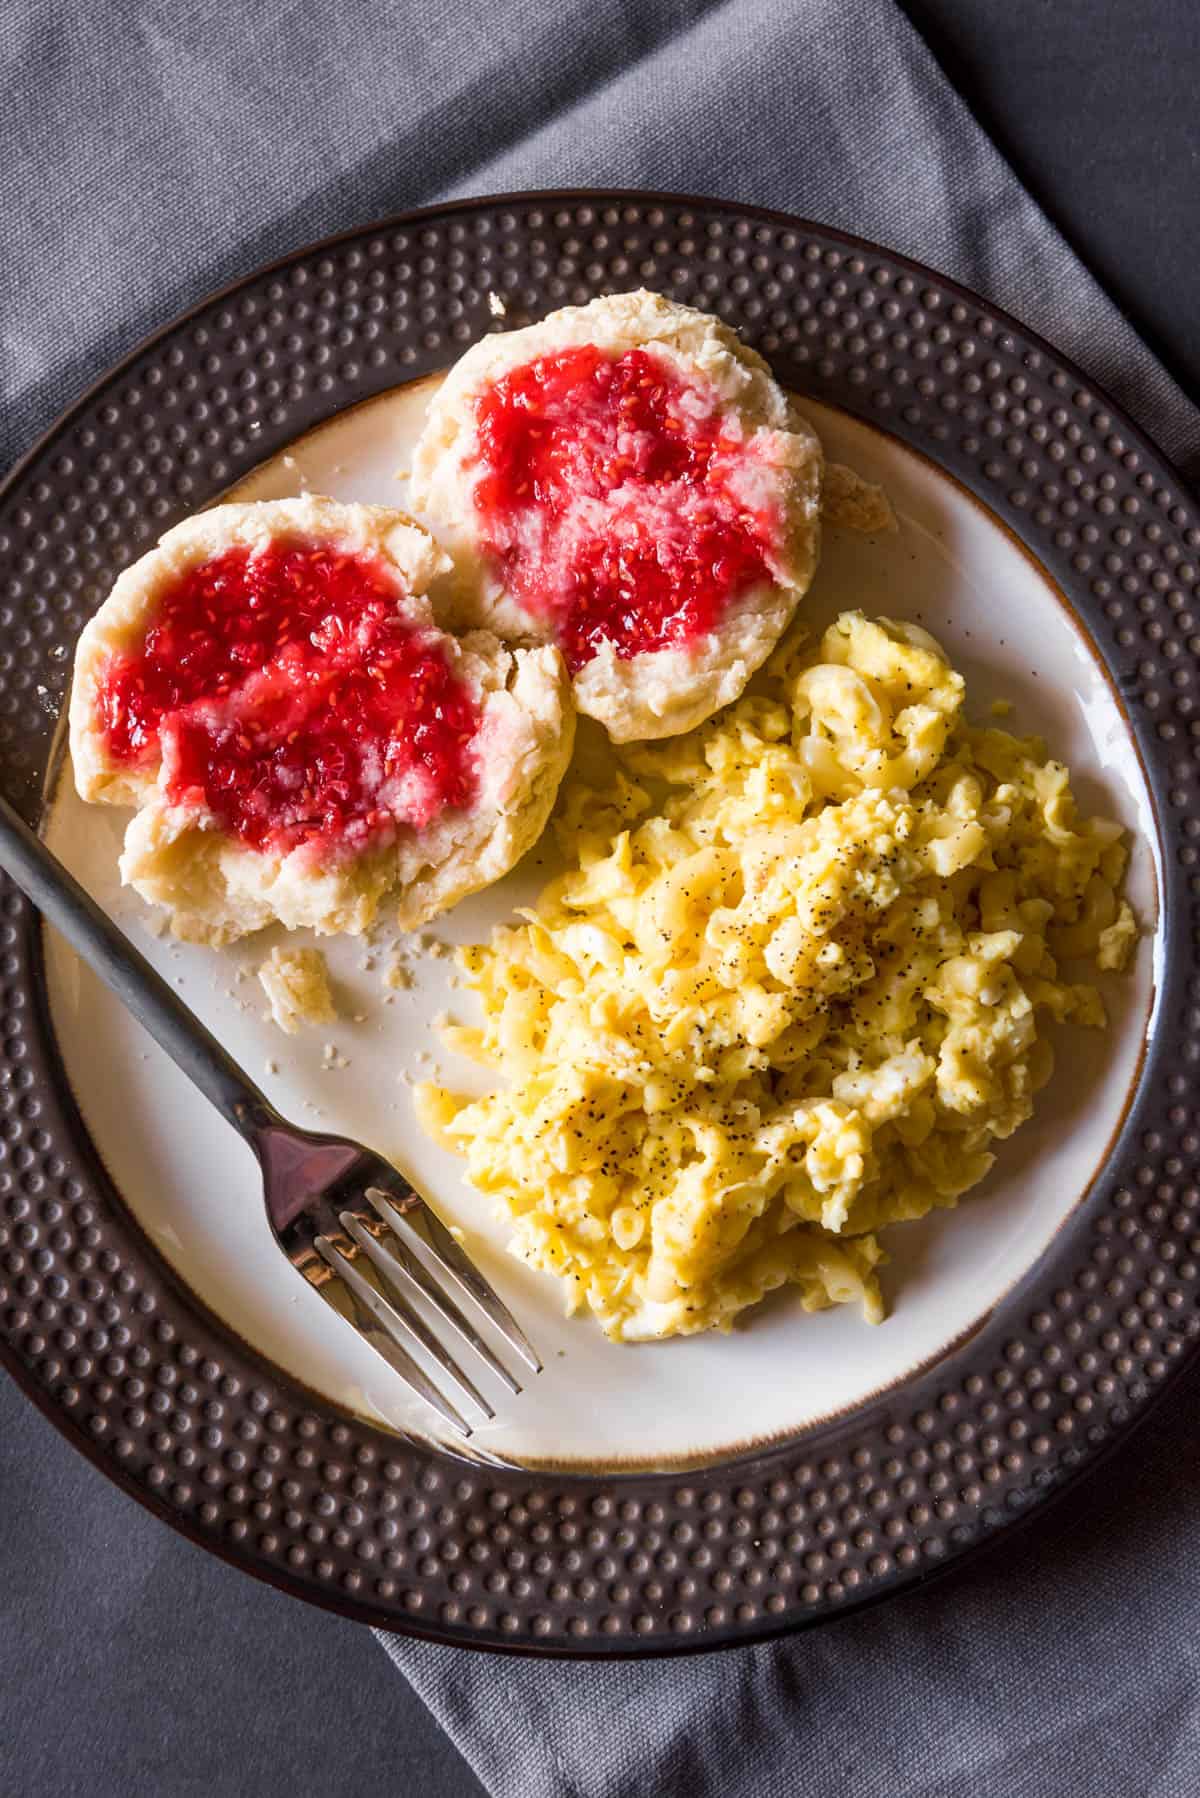 A plate with pink jam covered biscuits a fork and scrambled egg macaroni.